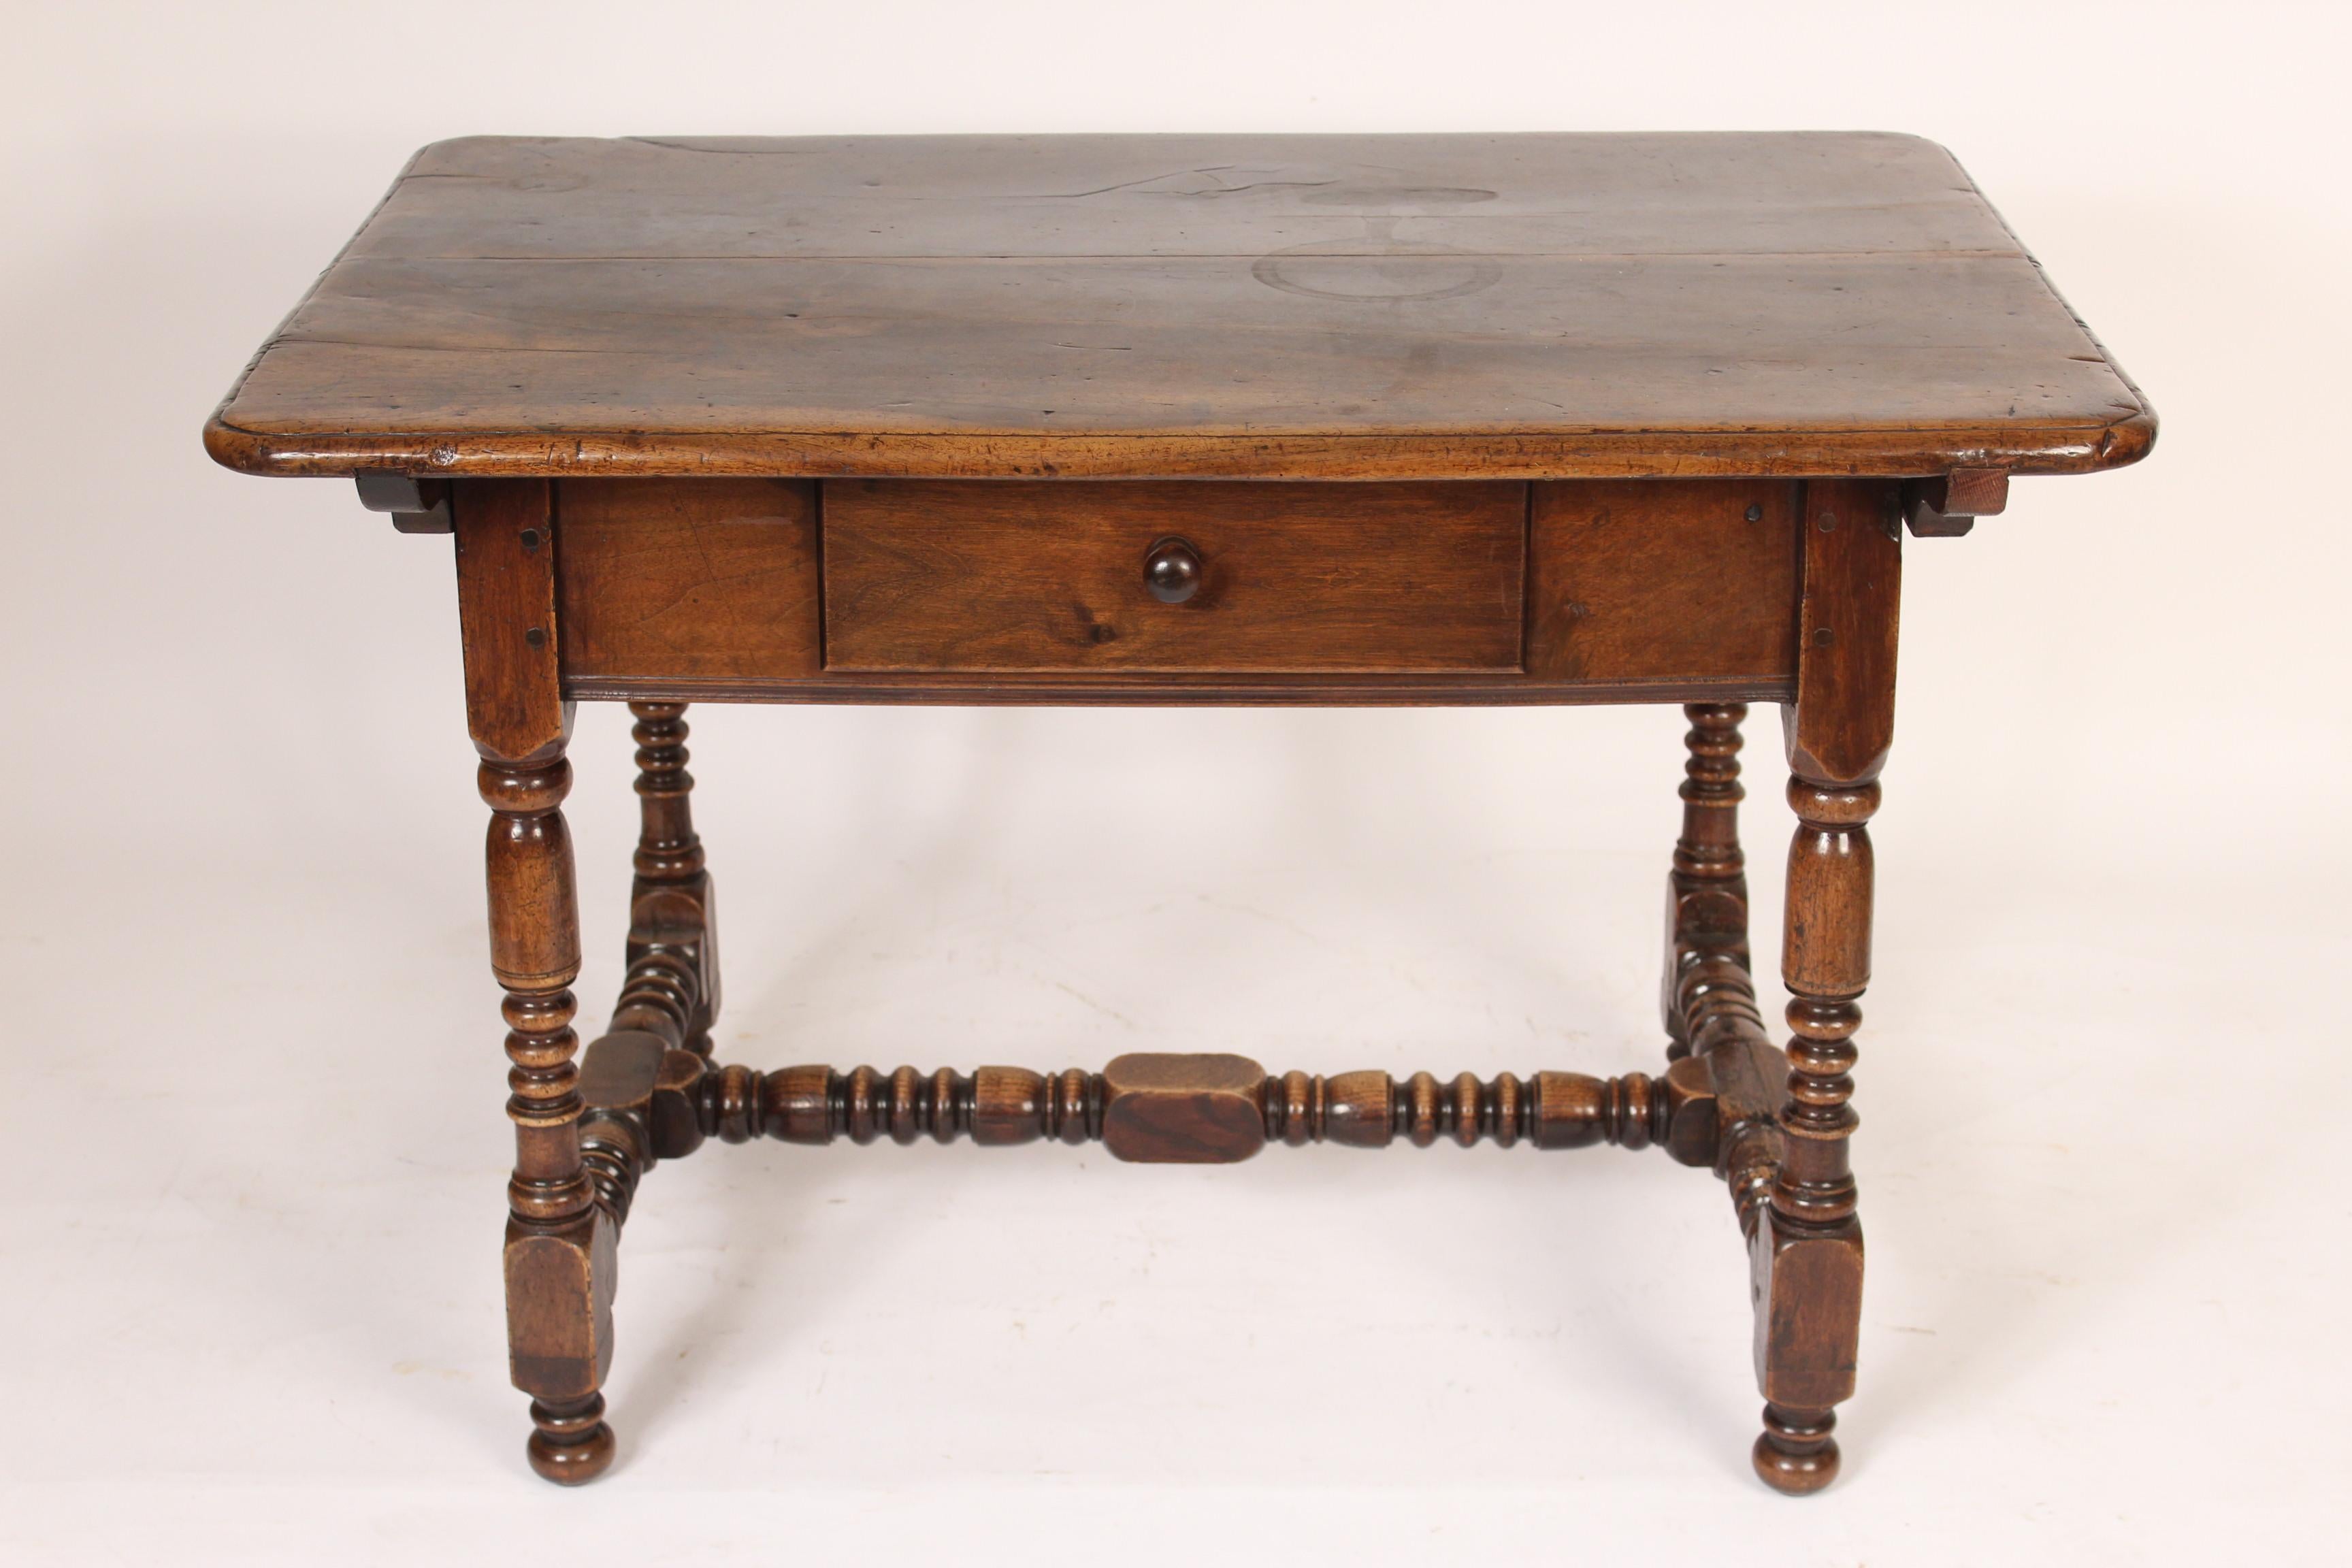 Antique Louis XIV style walnut and elm occasional / writing table, 19th century. Height from floor to bottom of top 29